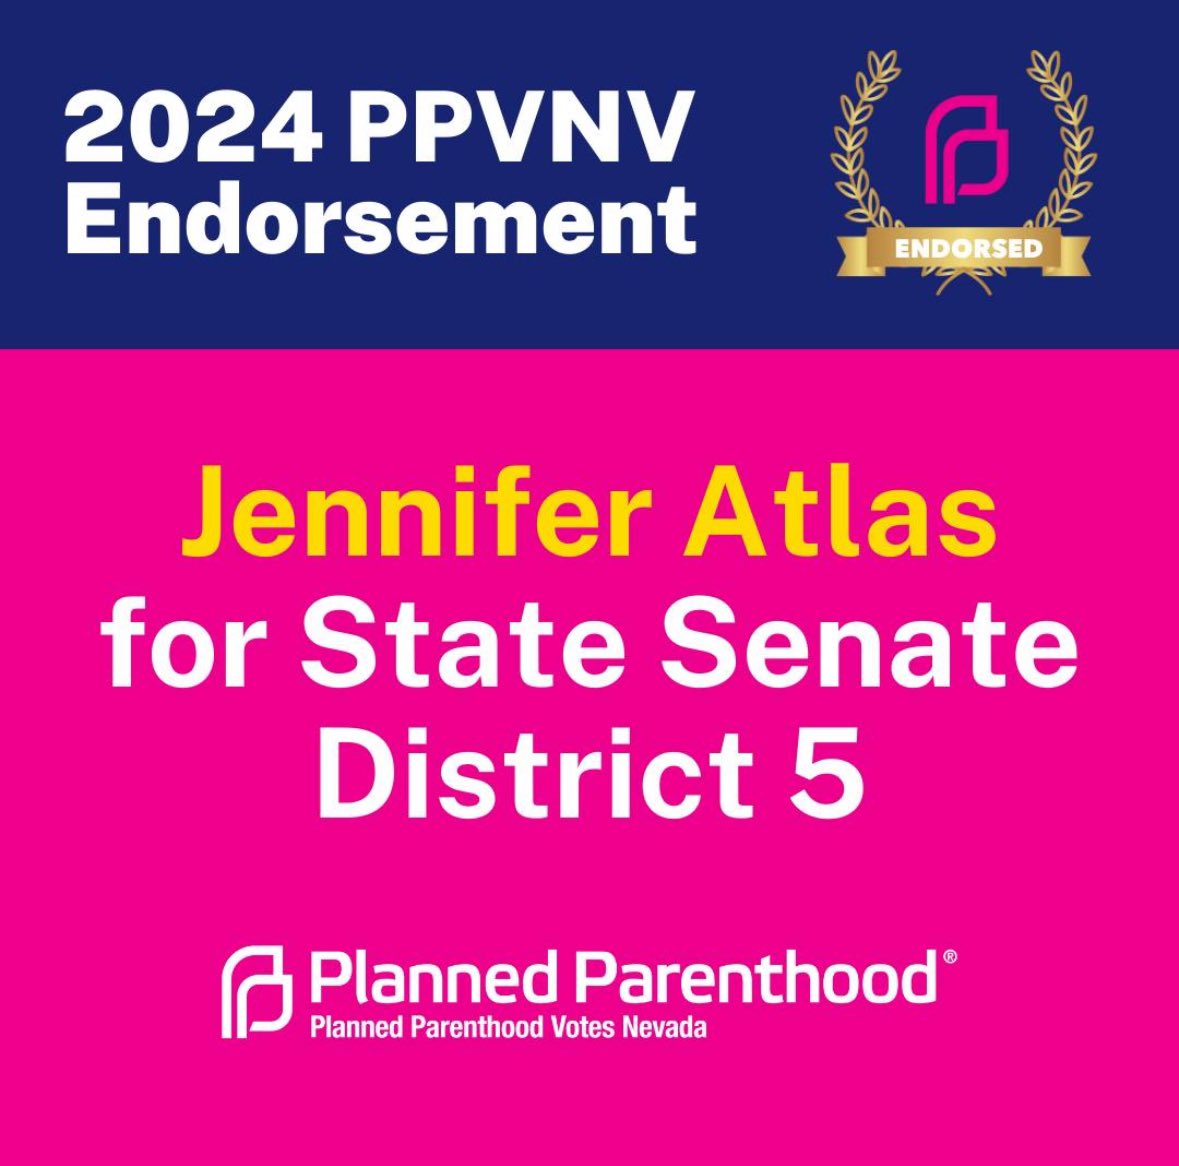 Breaking News! Planned Parenthood Votes Nevada has announced two more endorsements in the 2024 elections: @jenniferatlas in SD5 and @VoteAngieTaylor in SD15. #NVPol #Elections2024